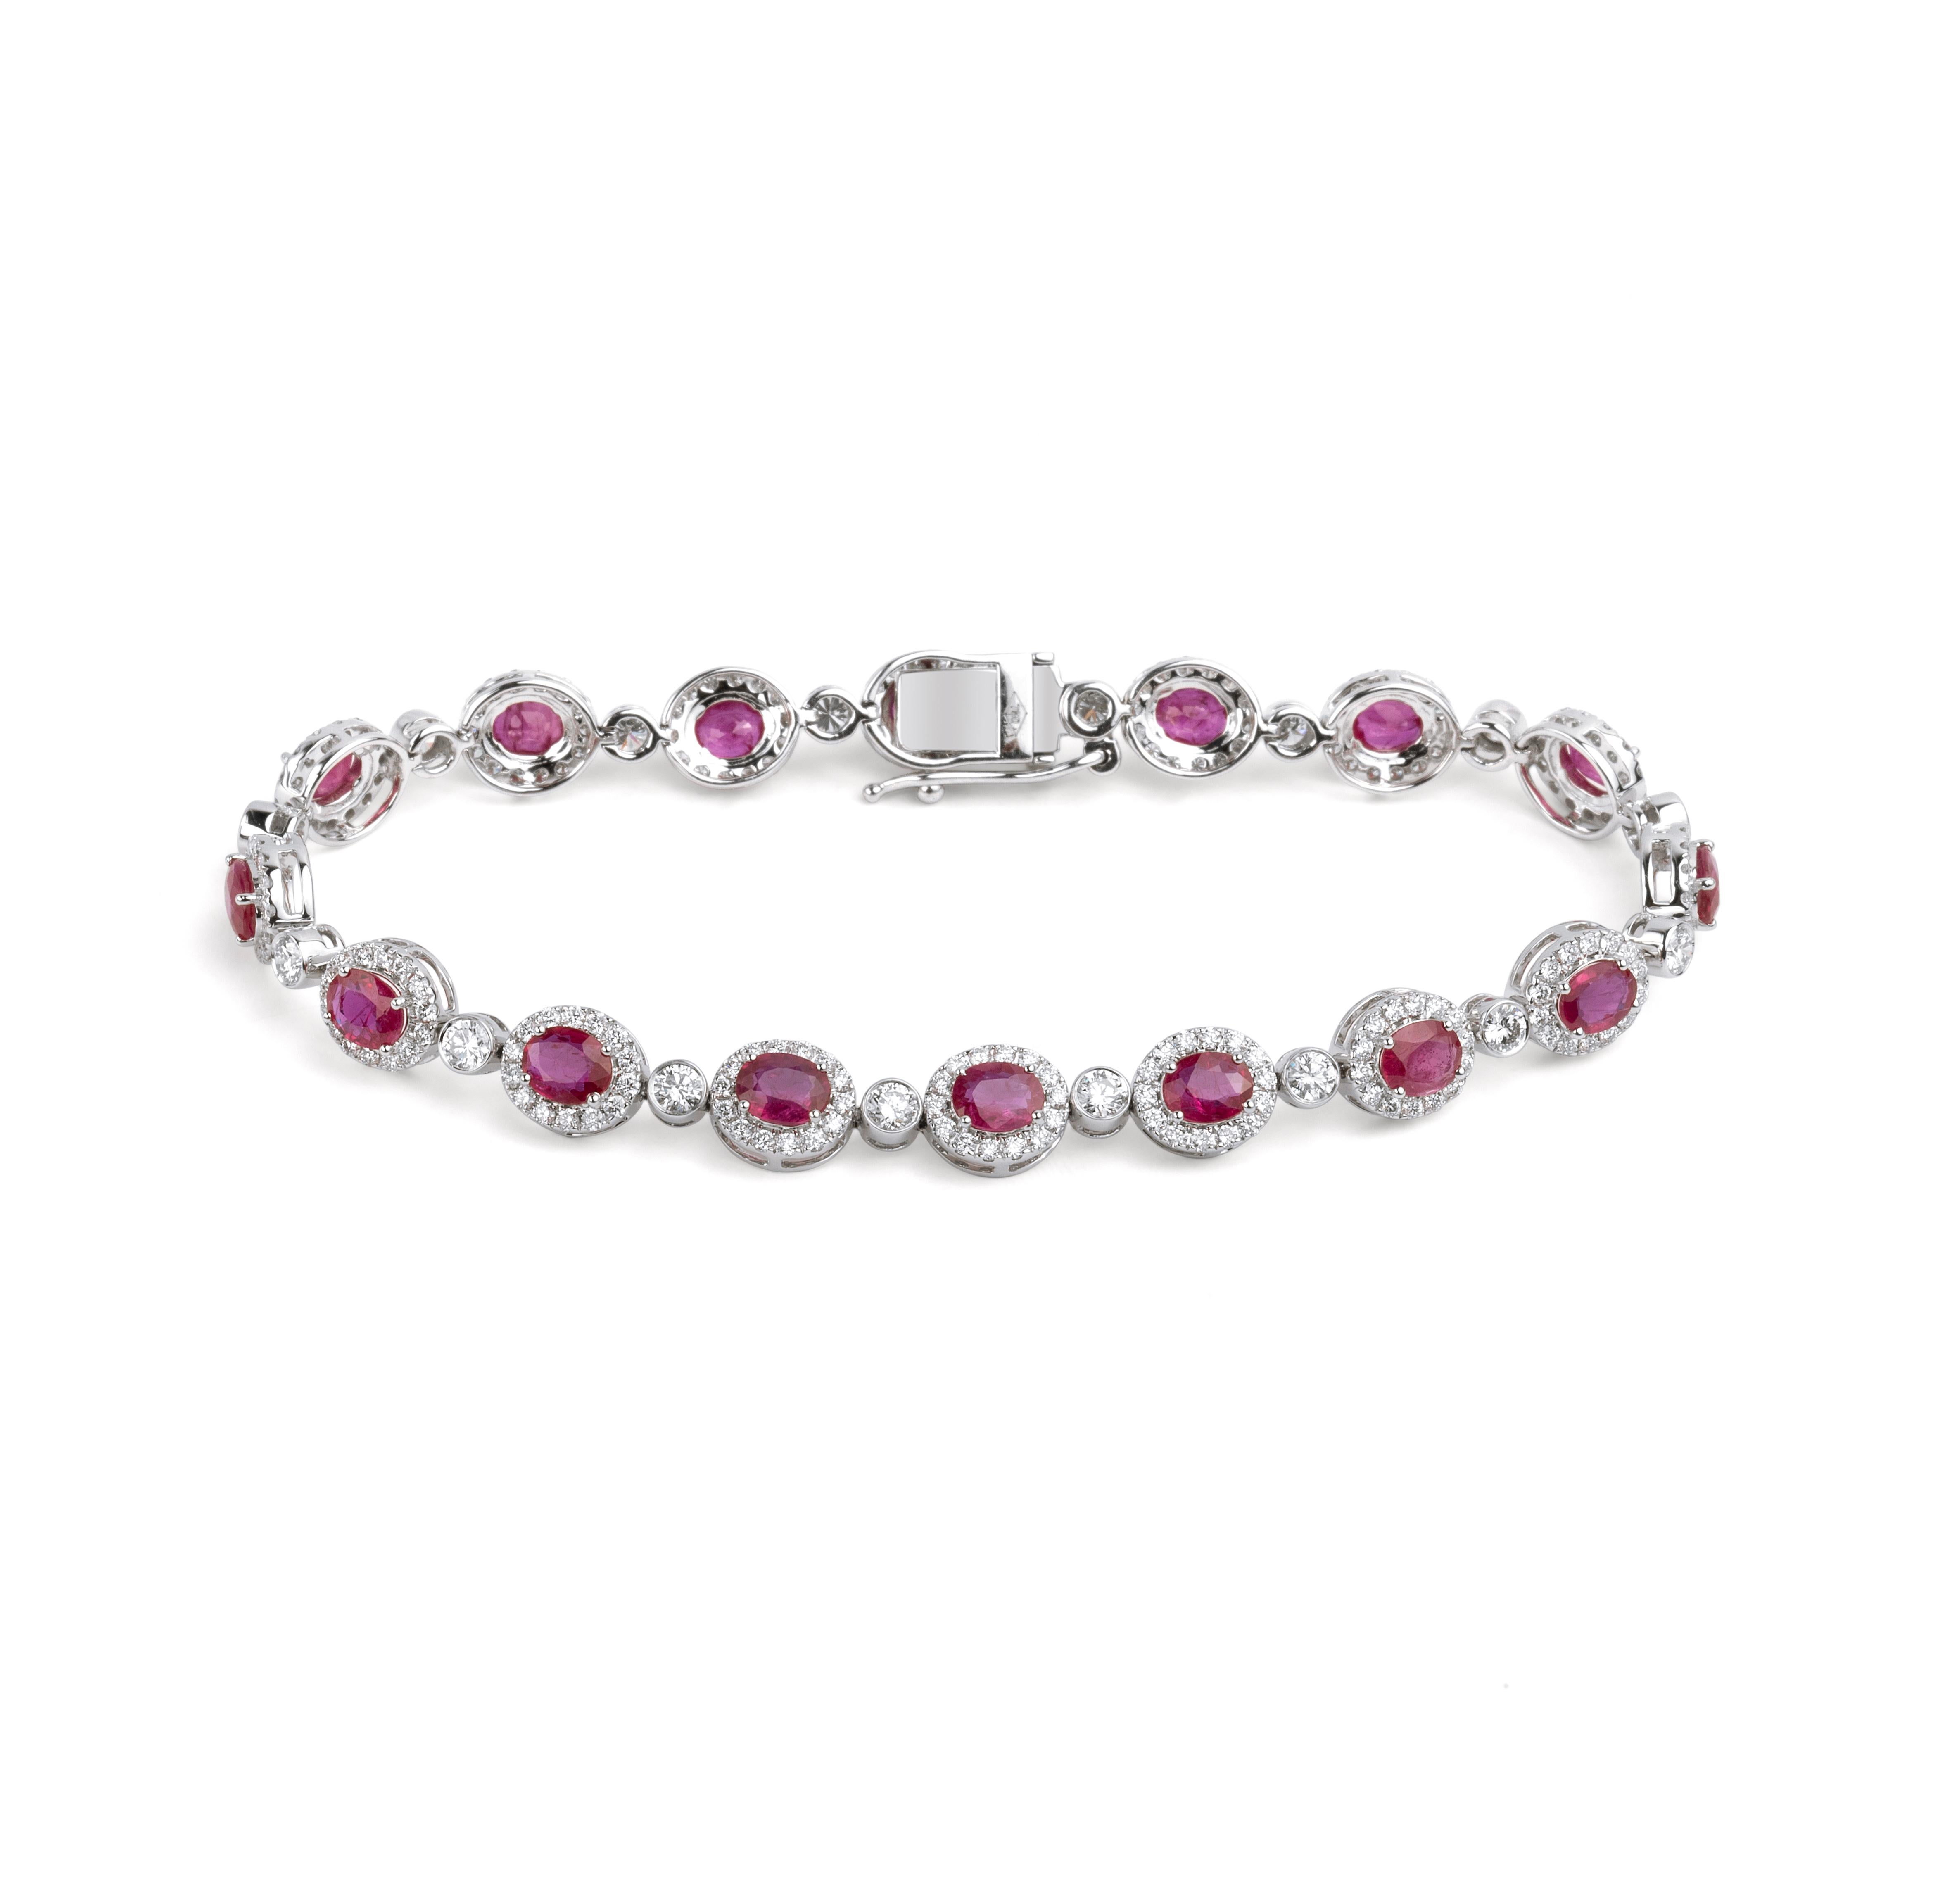 Exceptional 6 Ctw Oval Cut Natural Ruby Bracelet with diamond in 18k White Gold In New Condition For Sale In Jaipur, RJ